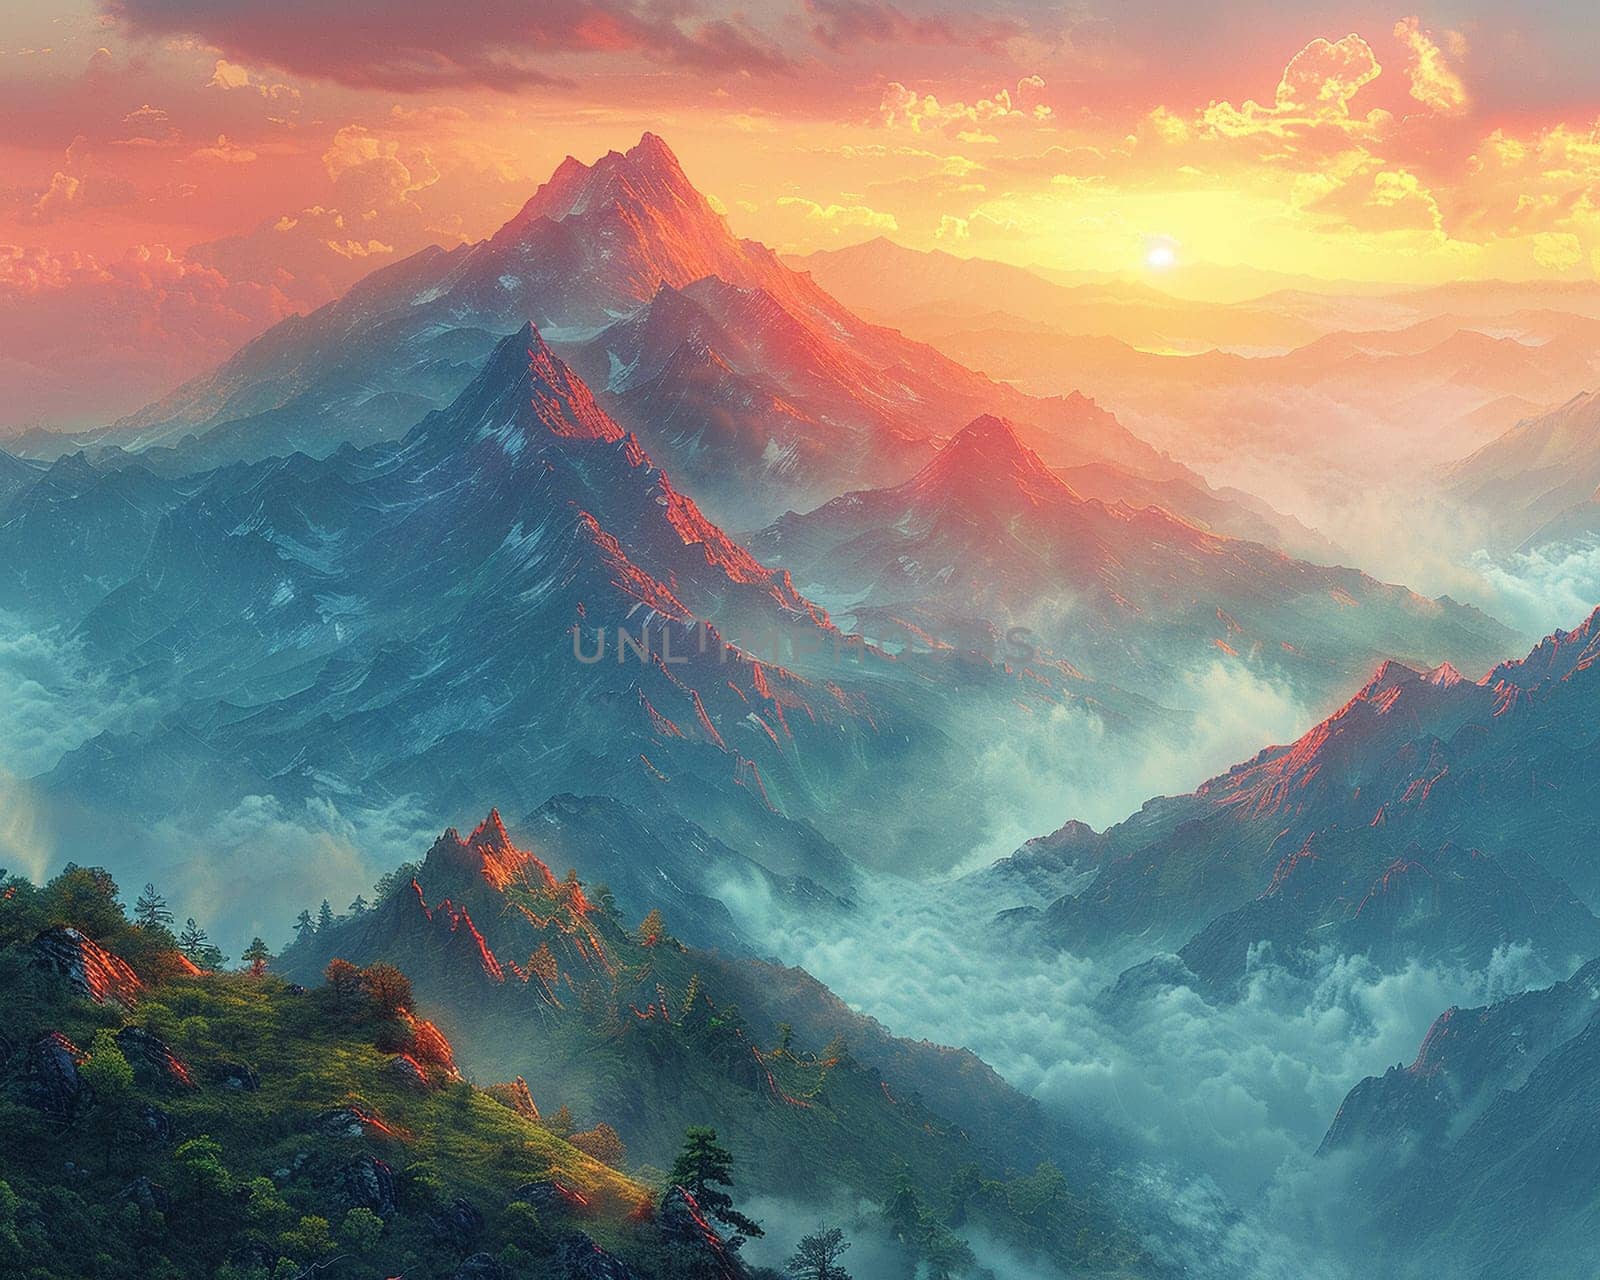 A peaceful sunrise over a mountain range, bathing the landscape in soft light.